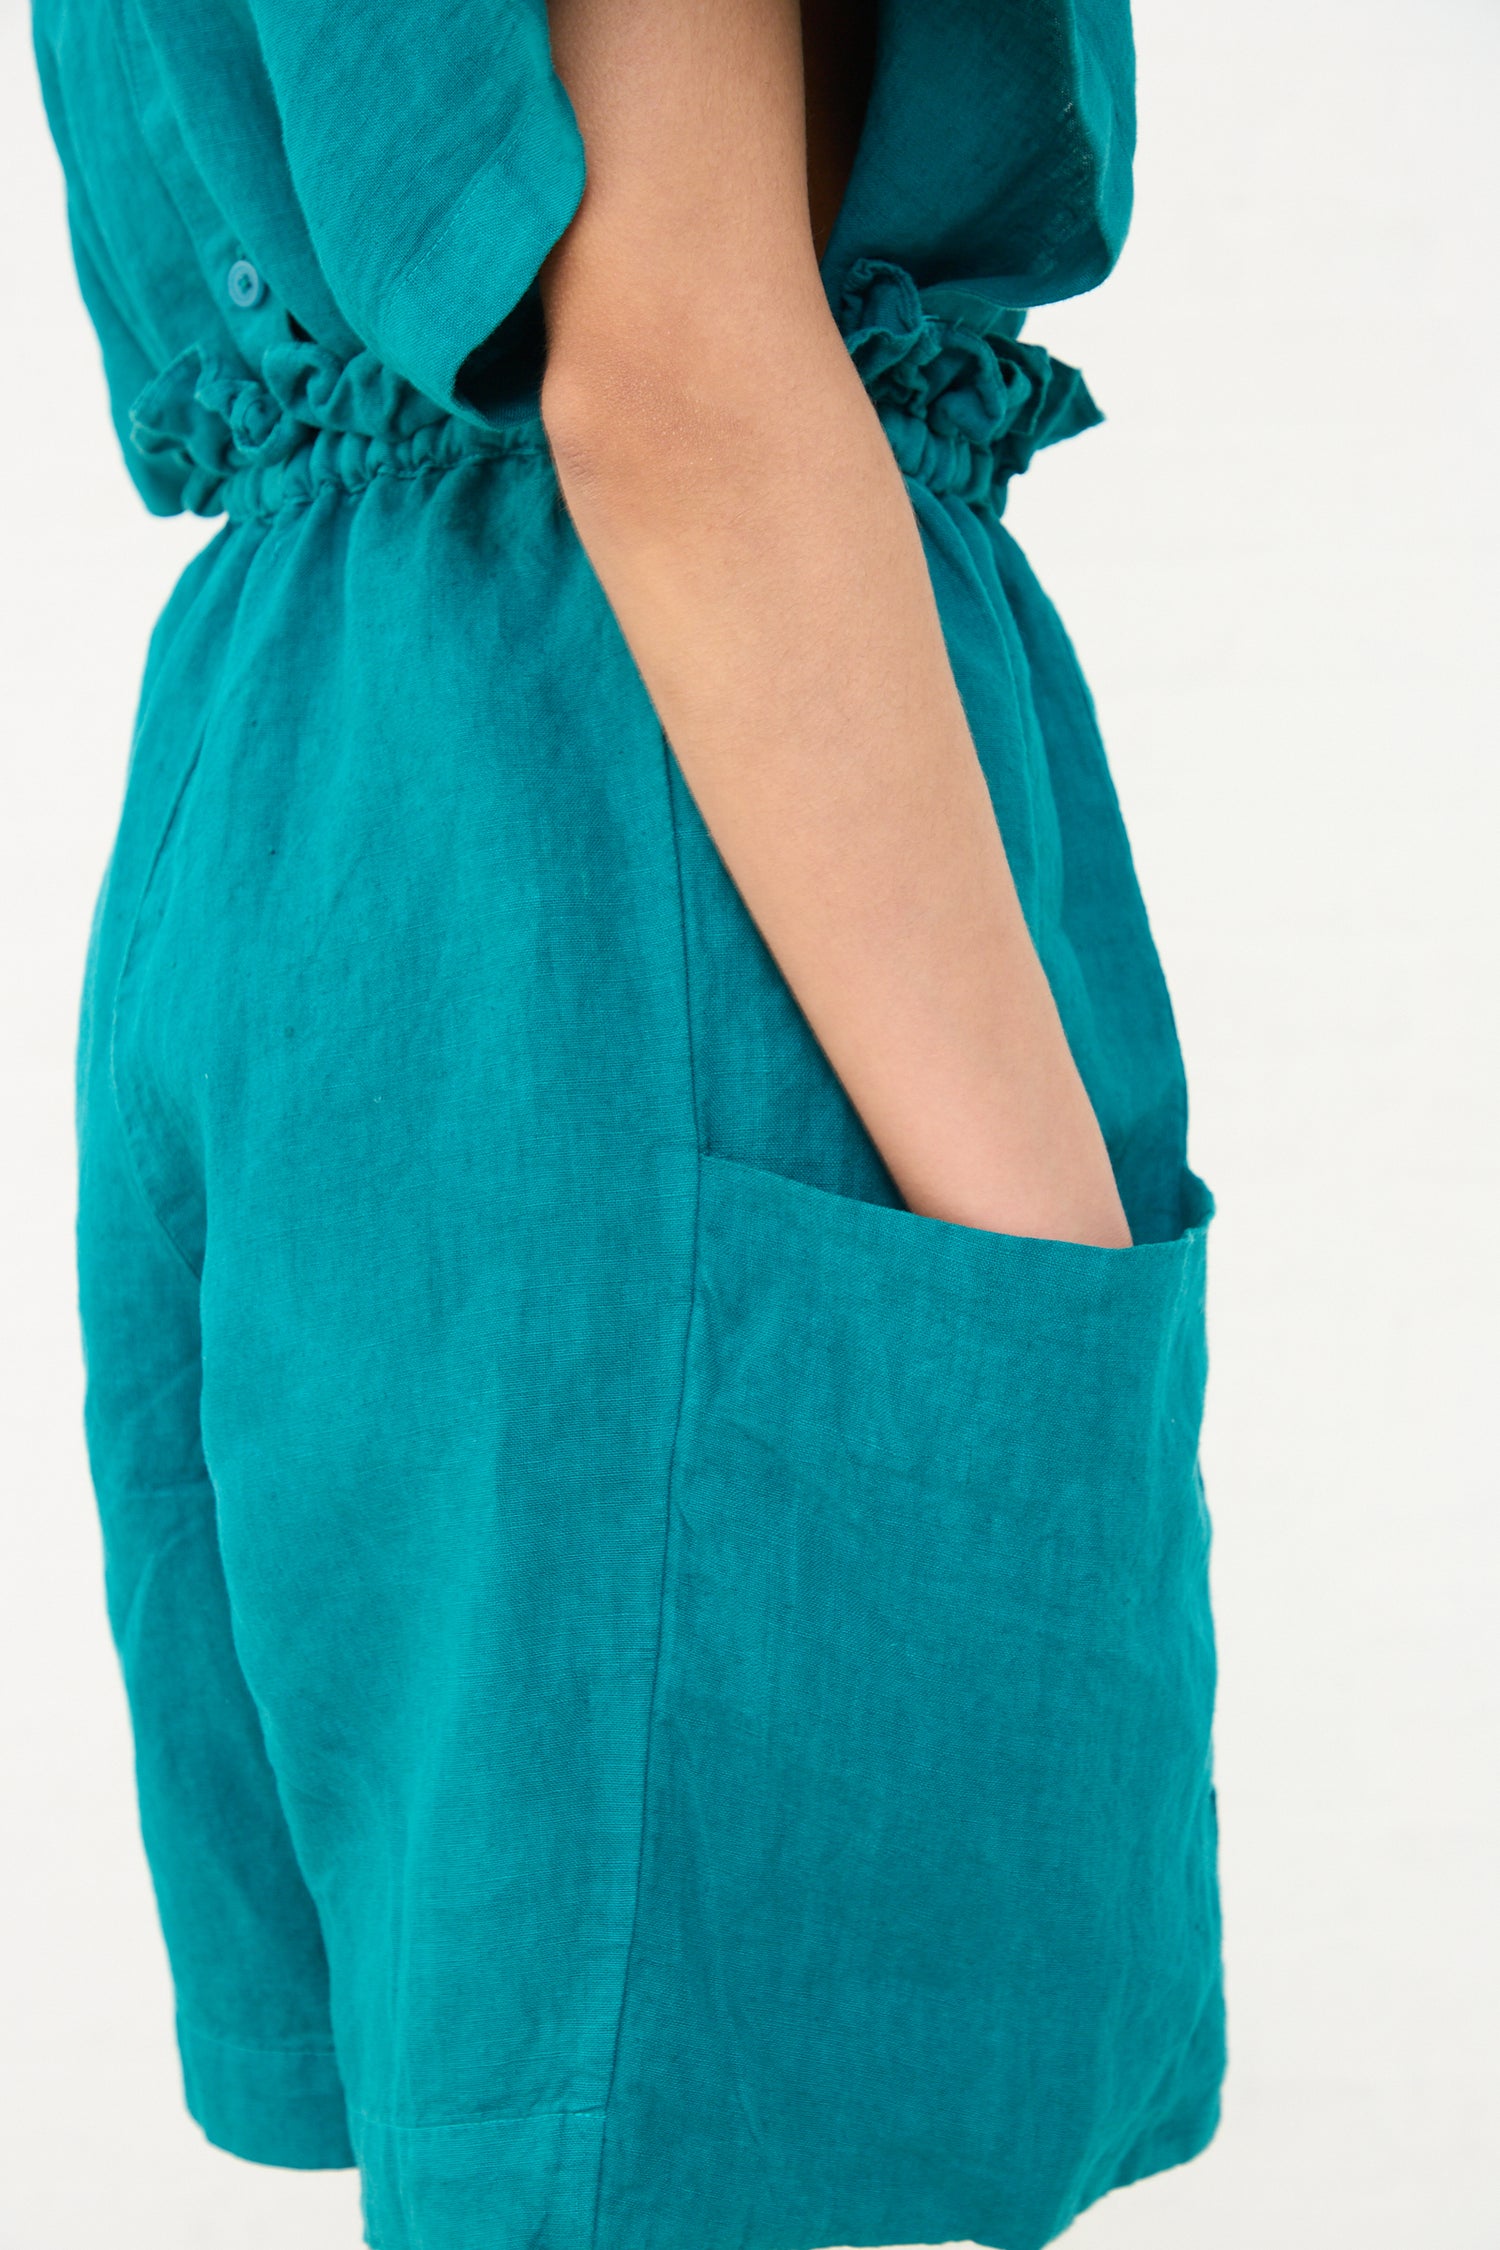 A person wearing a teal Black Crane linen dress with a hand casually tucked into the side pocket of their Black Crane parachute shorts.